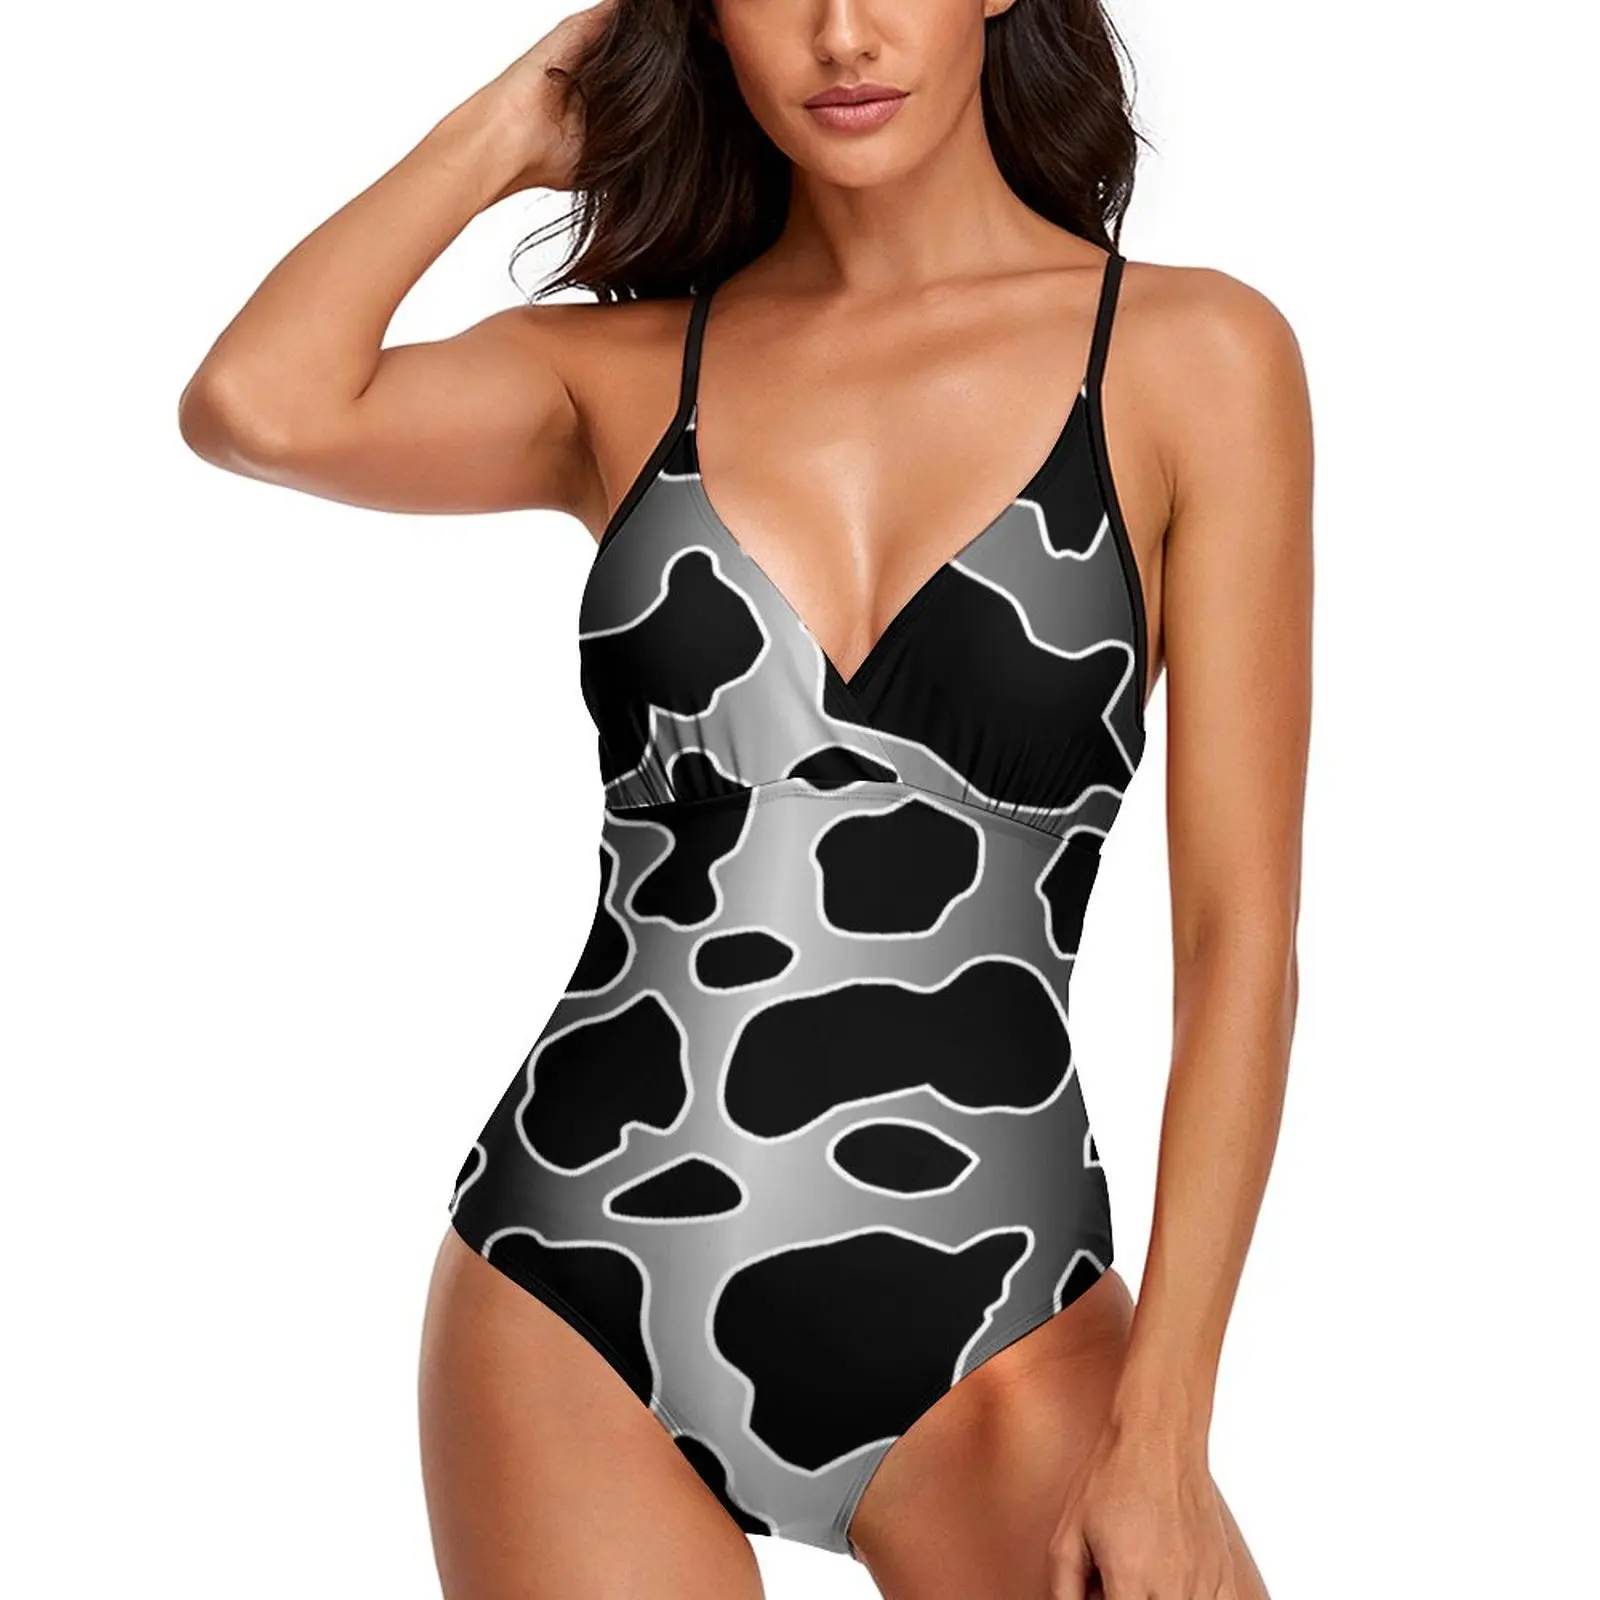 

Black White Cow Print Swimsuit Sexy Gray Gradient Faded Spots Sling Swimwear One Piece Aesthetic Swimsuits Fitness Beach Wear